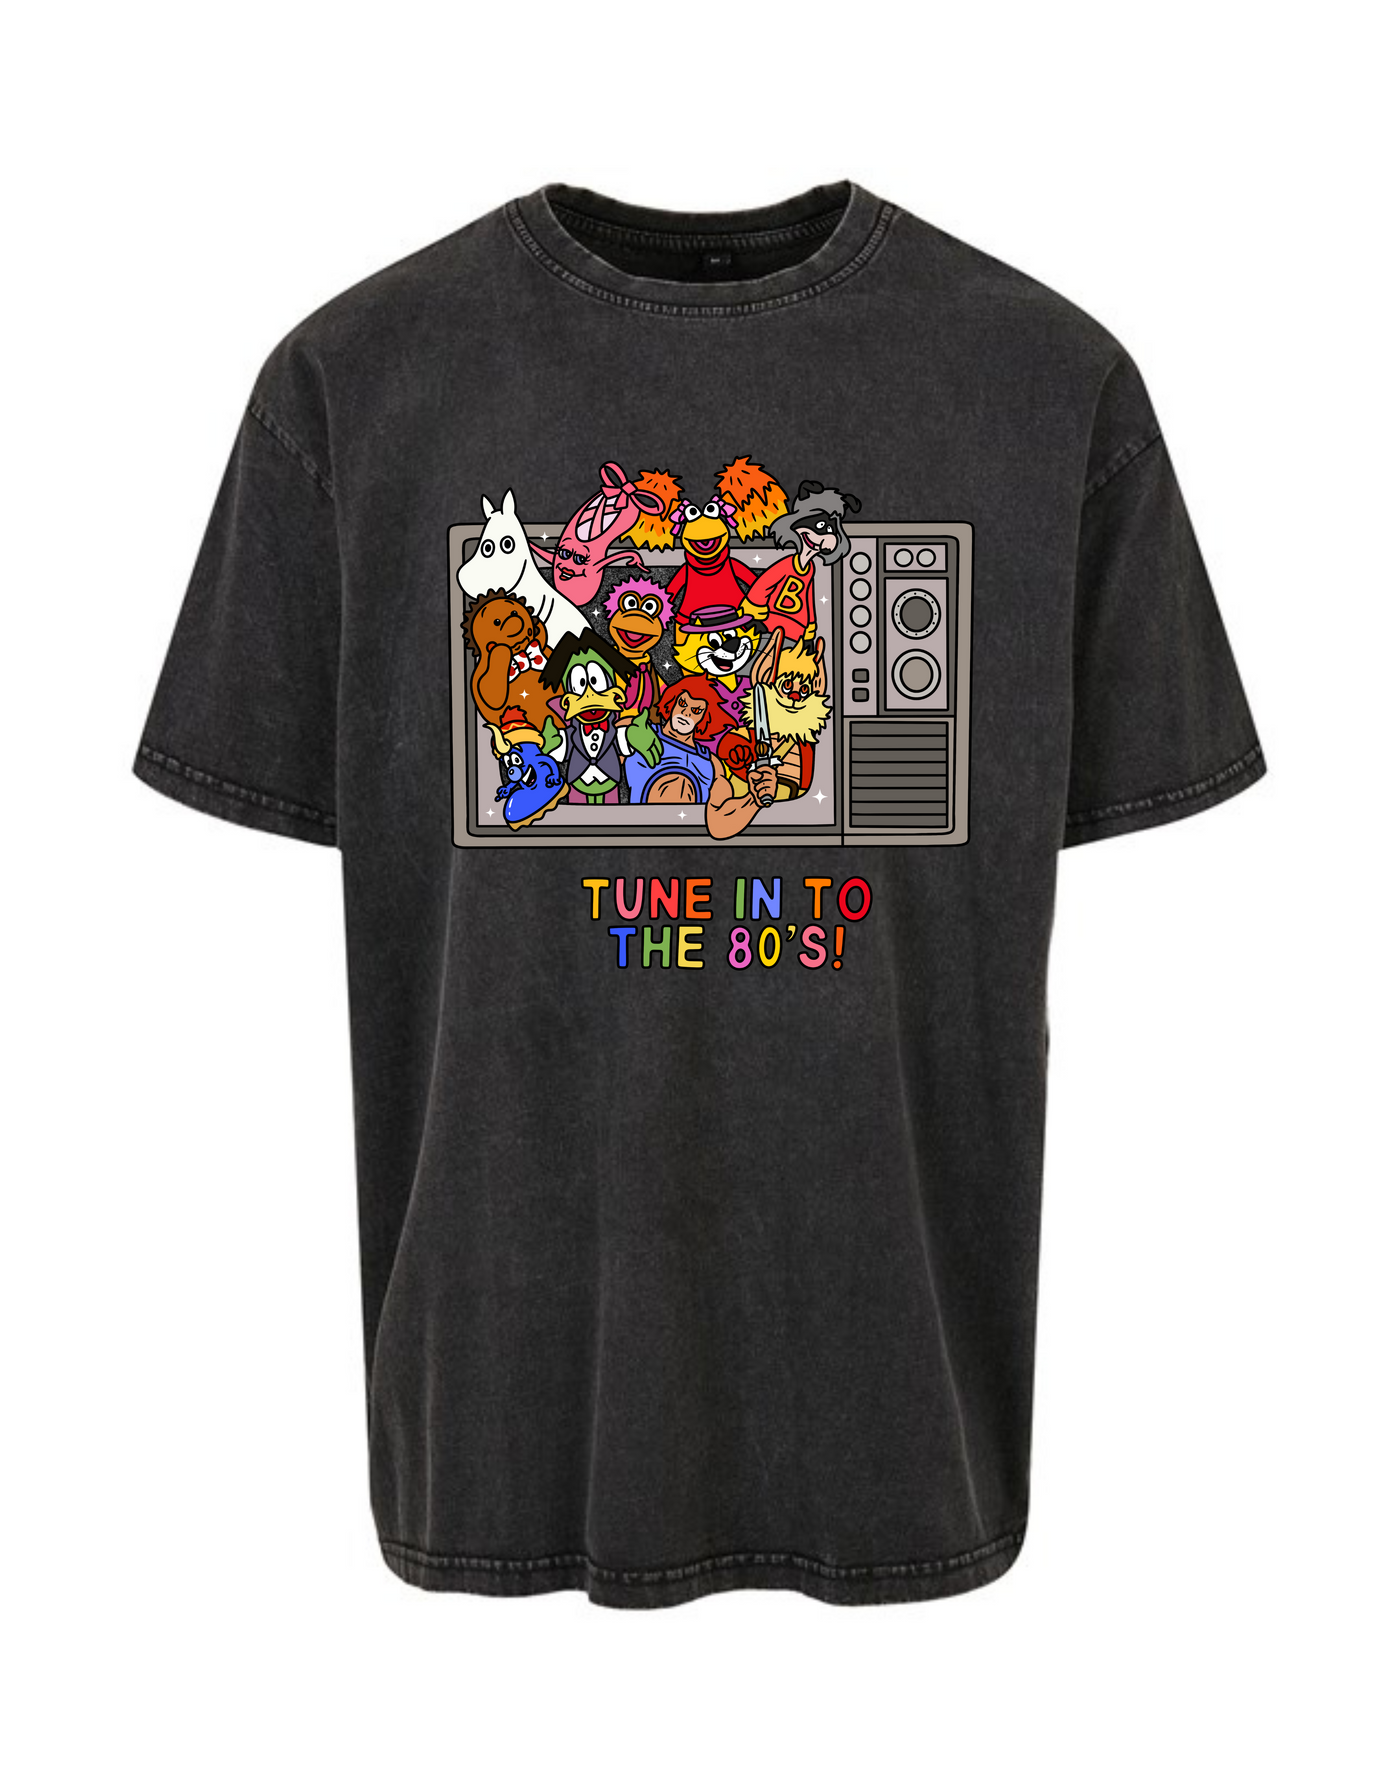 "Tune In To The 80's" Acid Wash T-Shirt